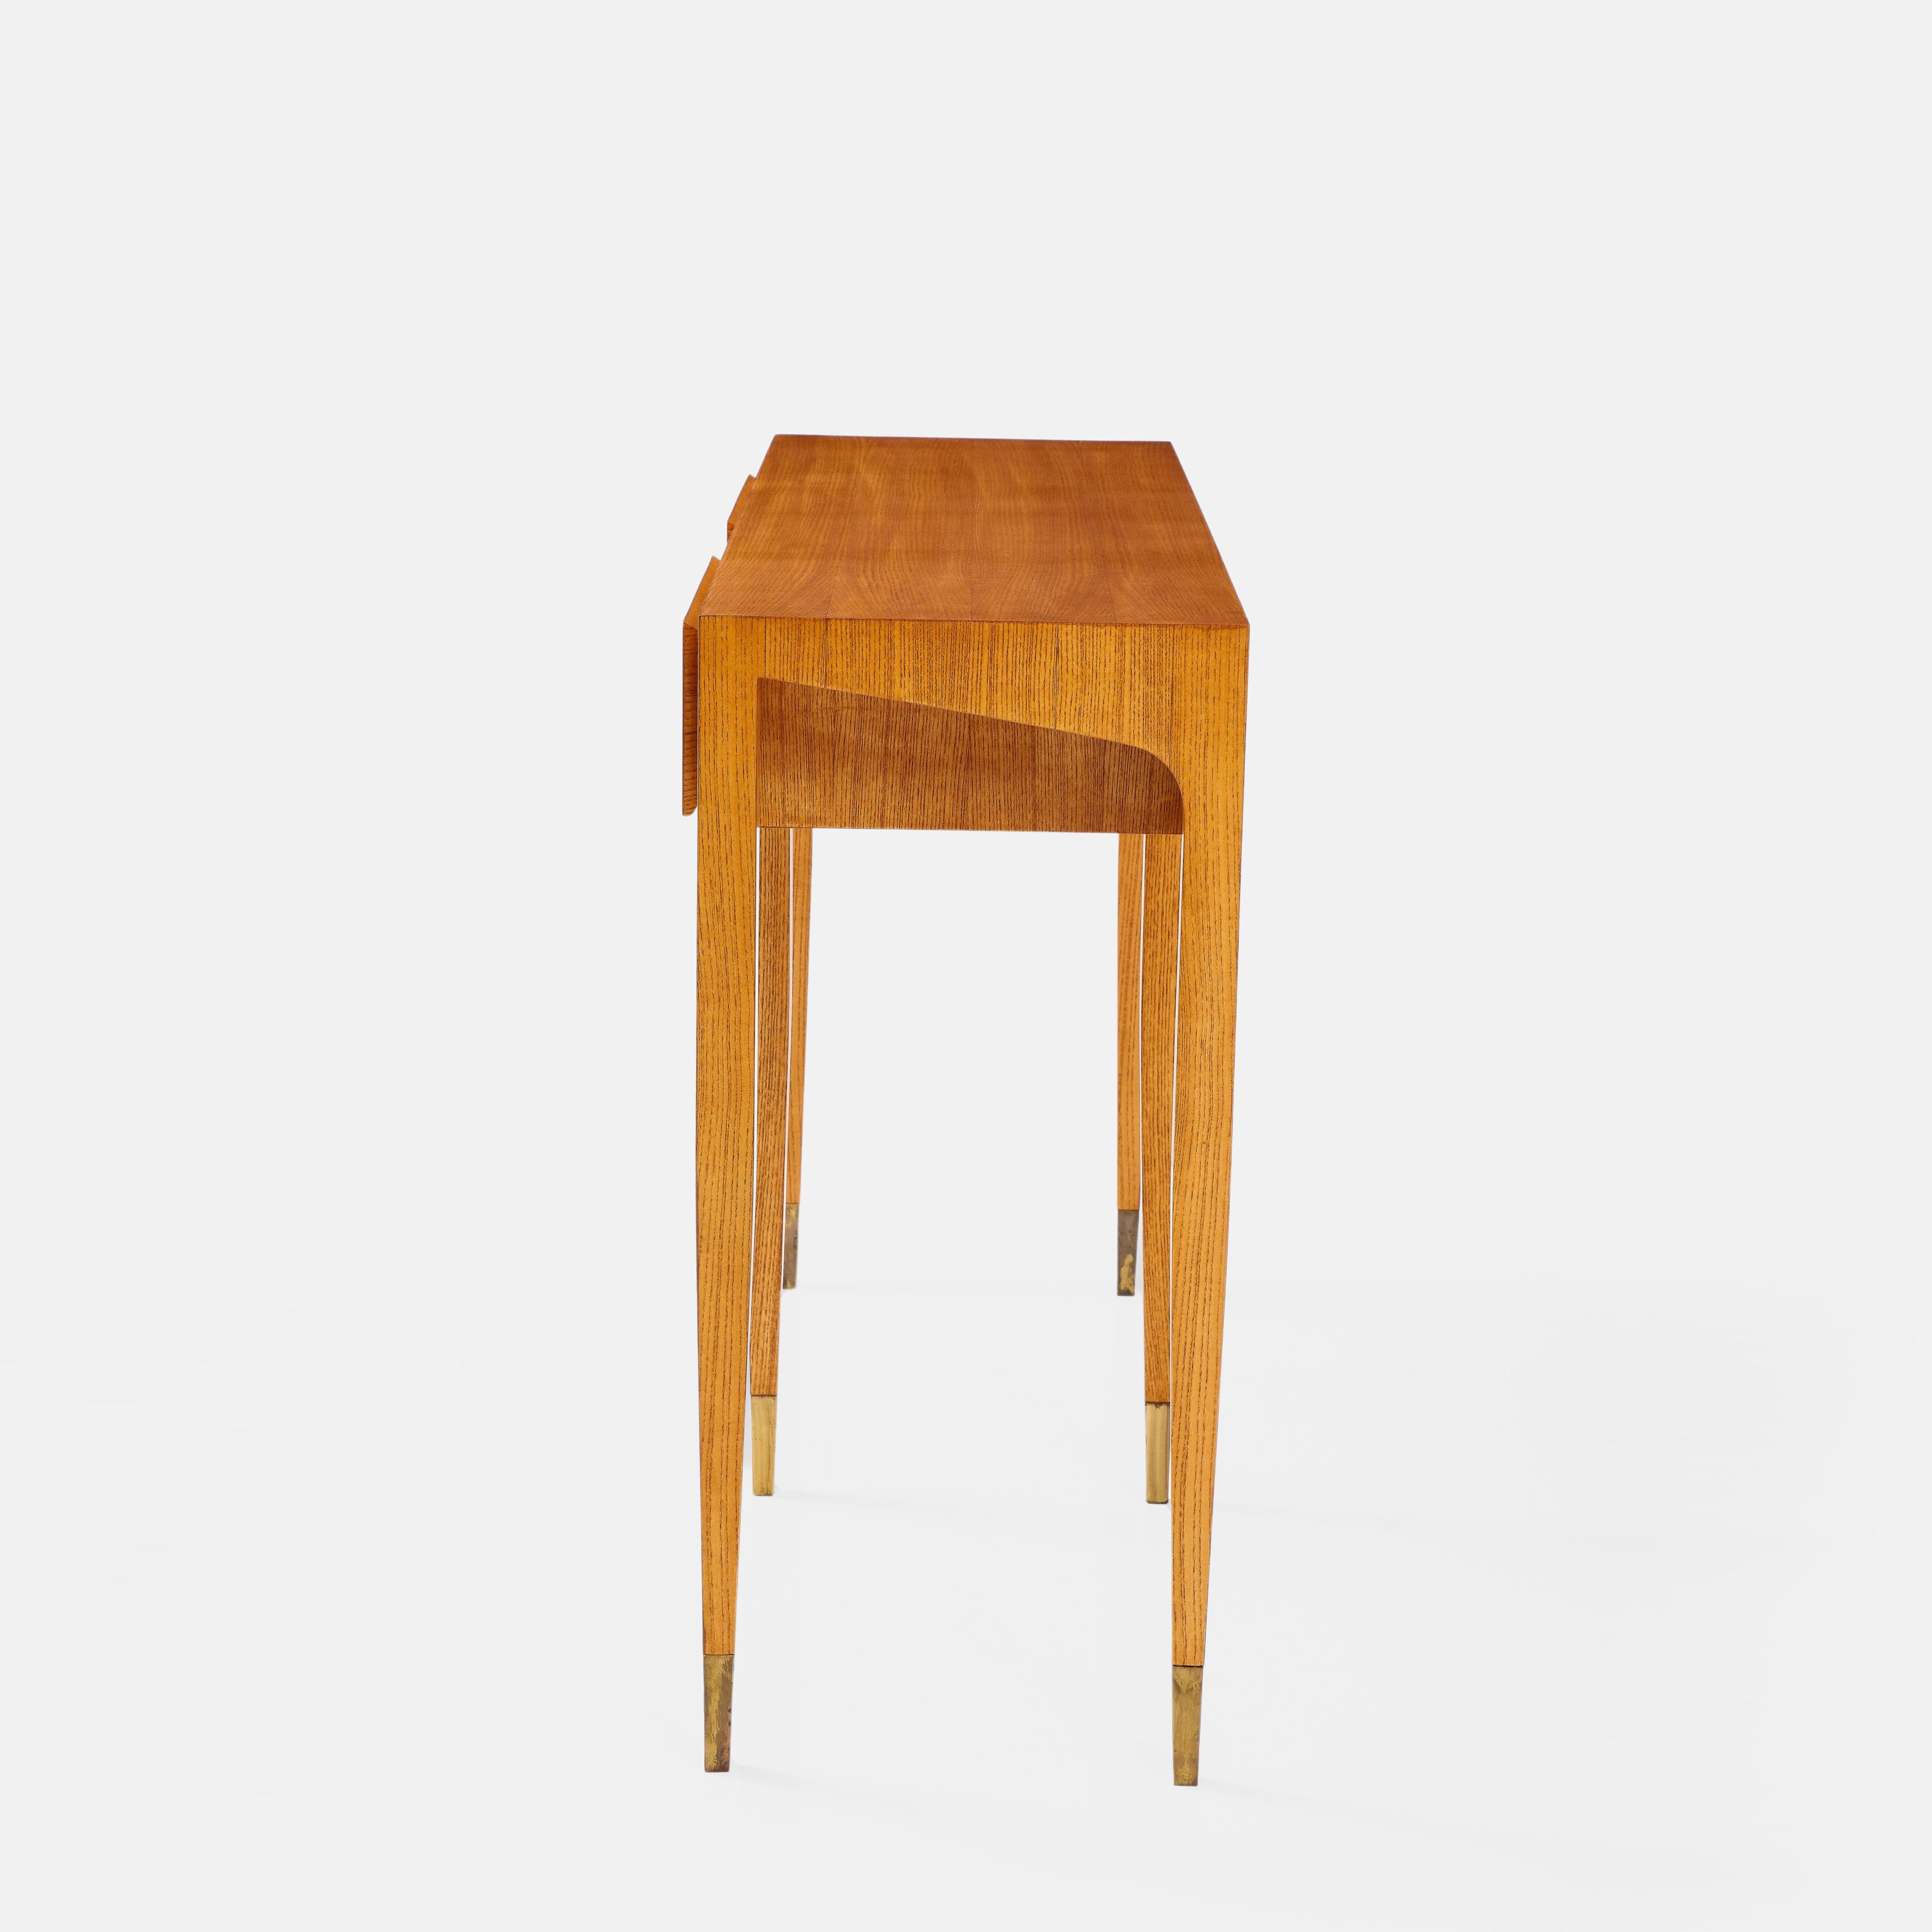 Mid-Century Modern Gio Ponti for Giordano Chiesa Rare Ash Wood Console, Italy, 1950s For Sale